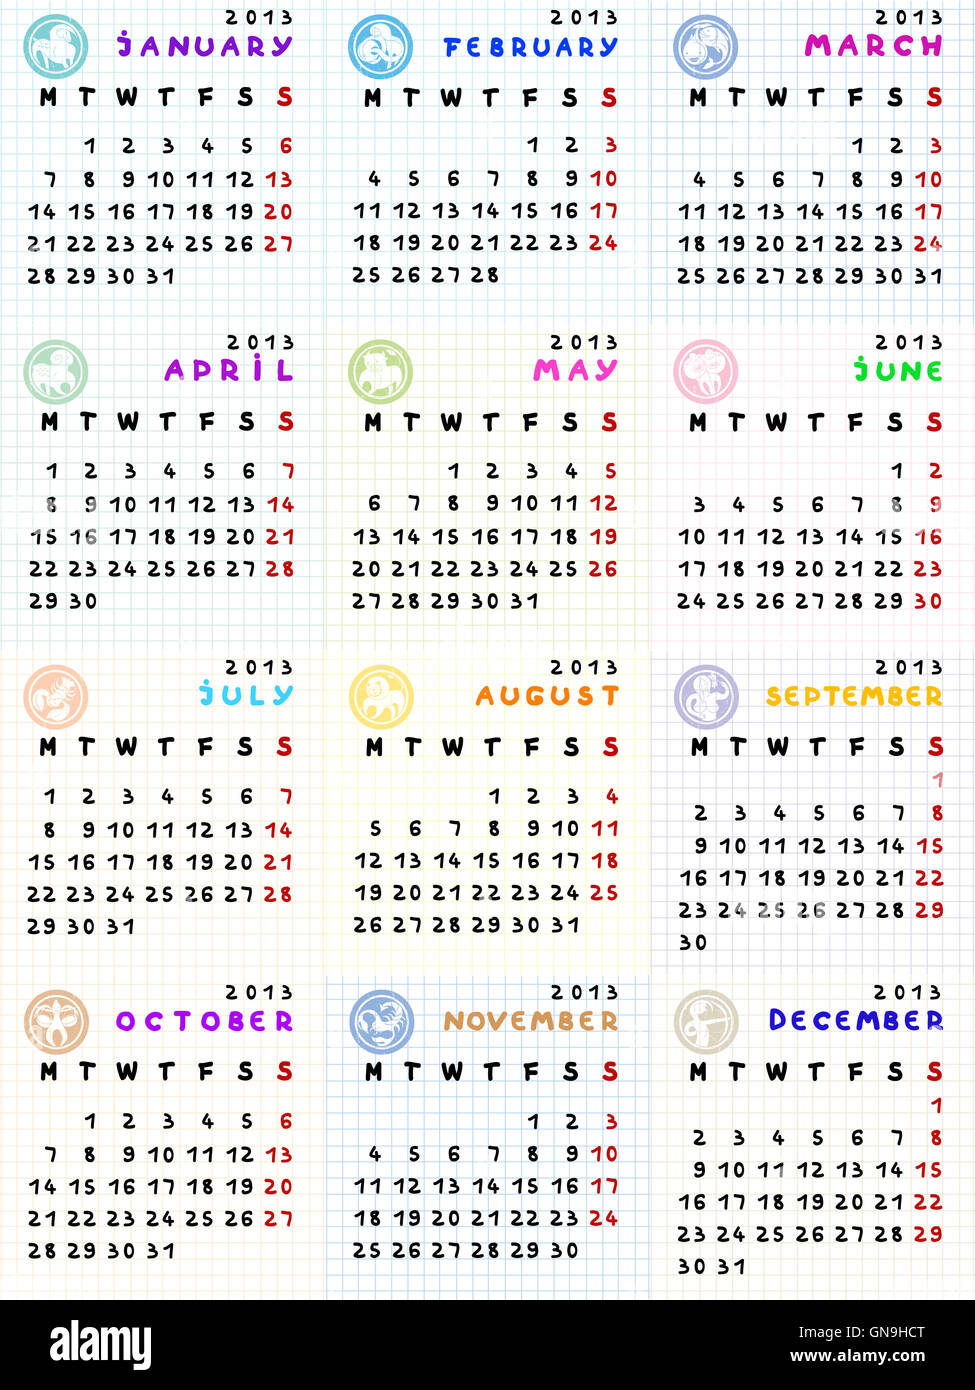 November Calender 13 High Resolution Stock Photography And Images Alamy